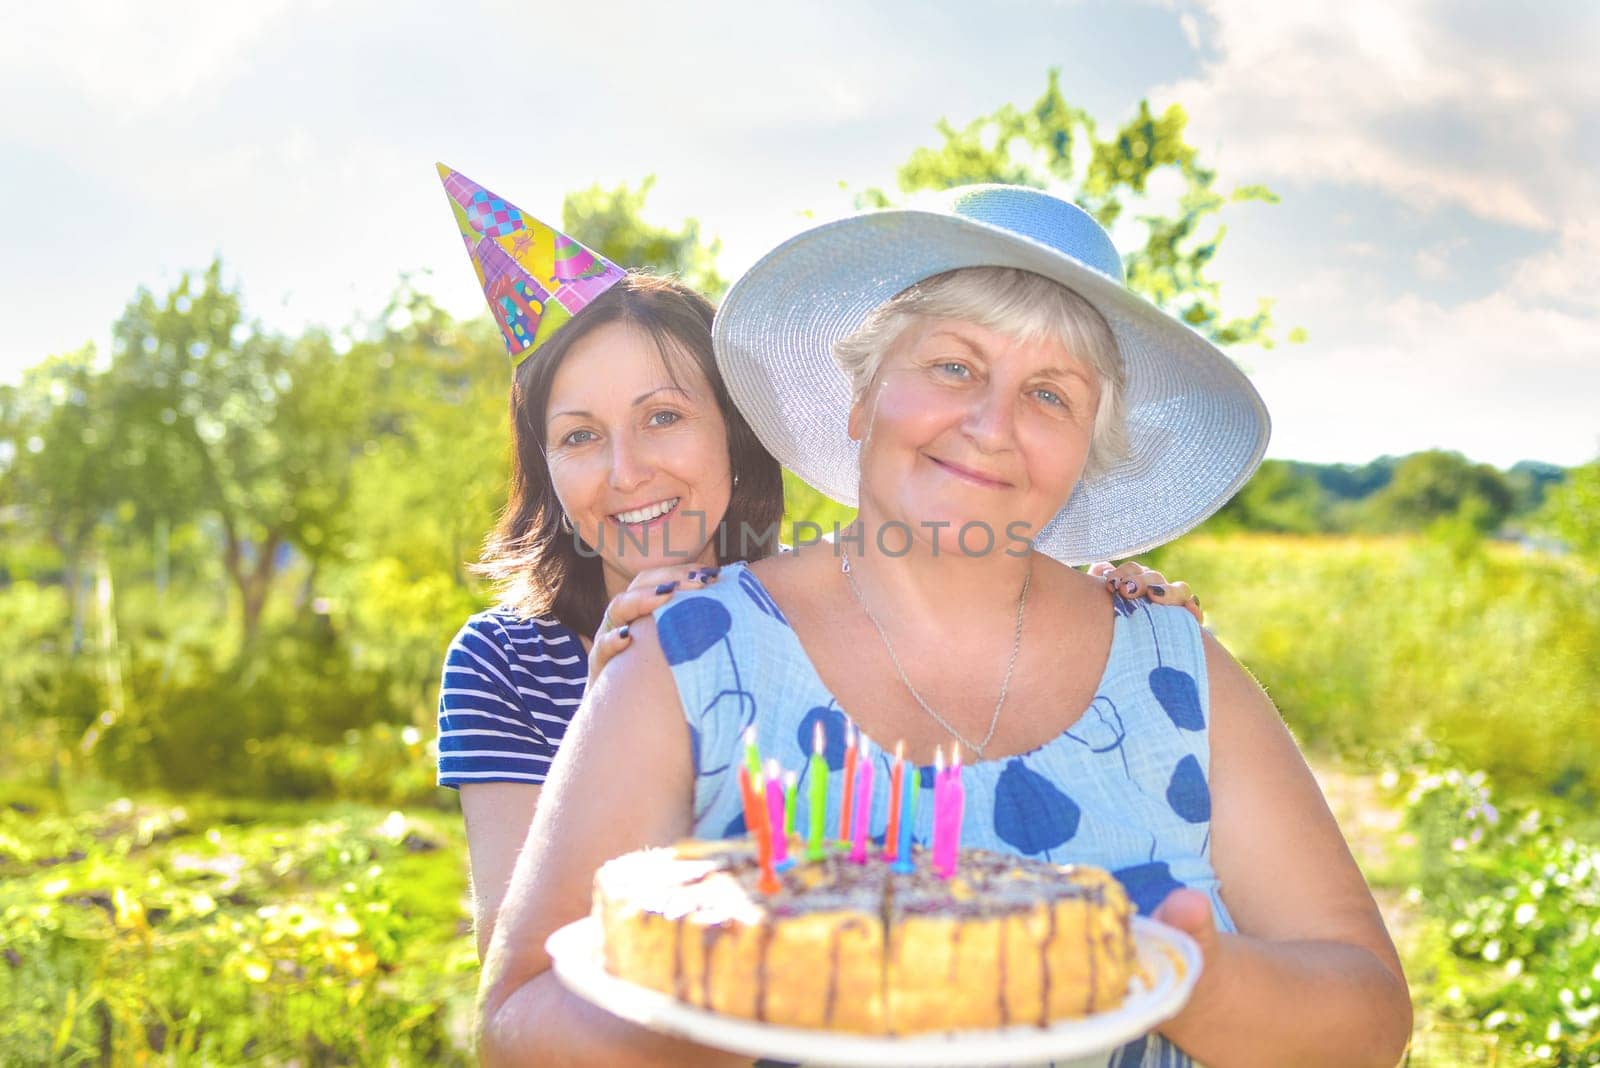 Grandmother's birthday, who with a smile, together with her daughter in the village and holds a birthday homemade cake. by Nickstock